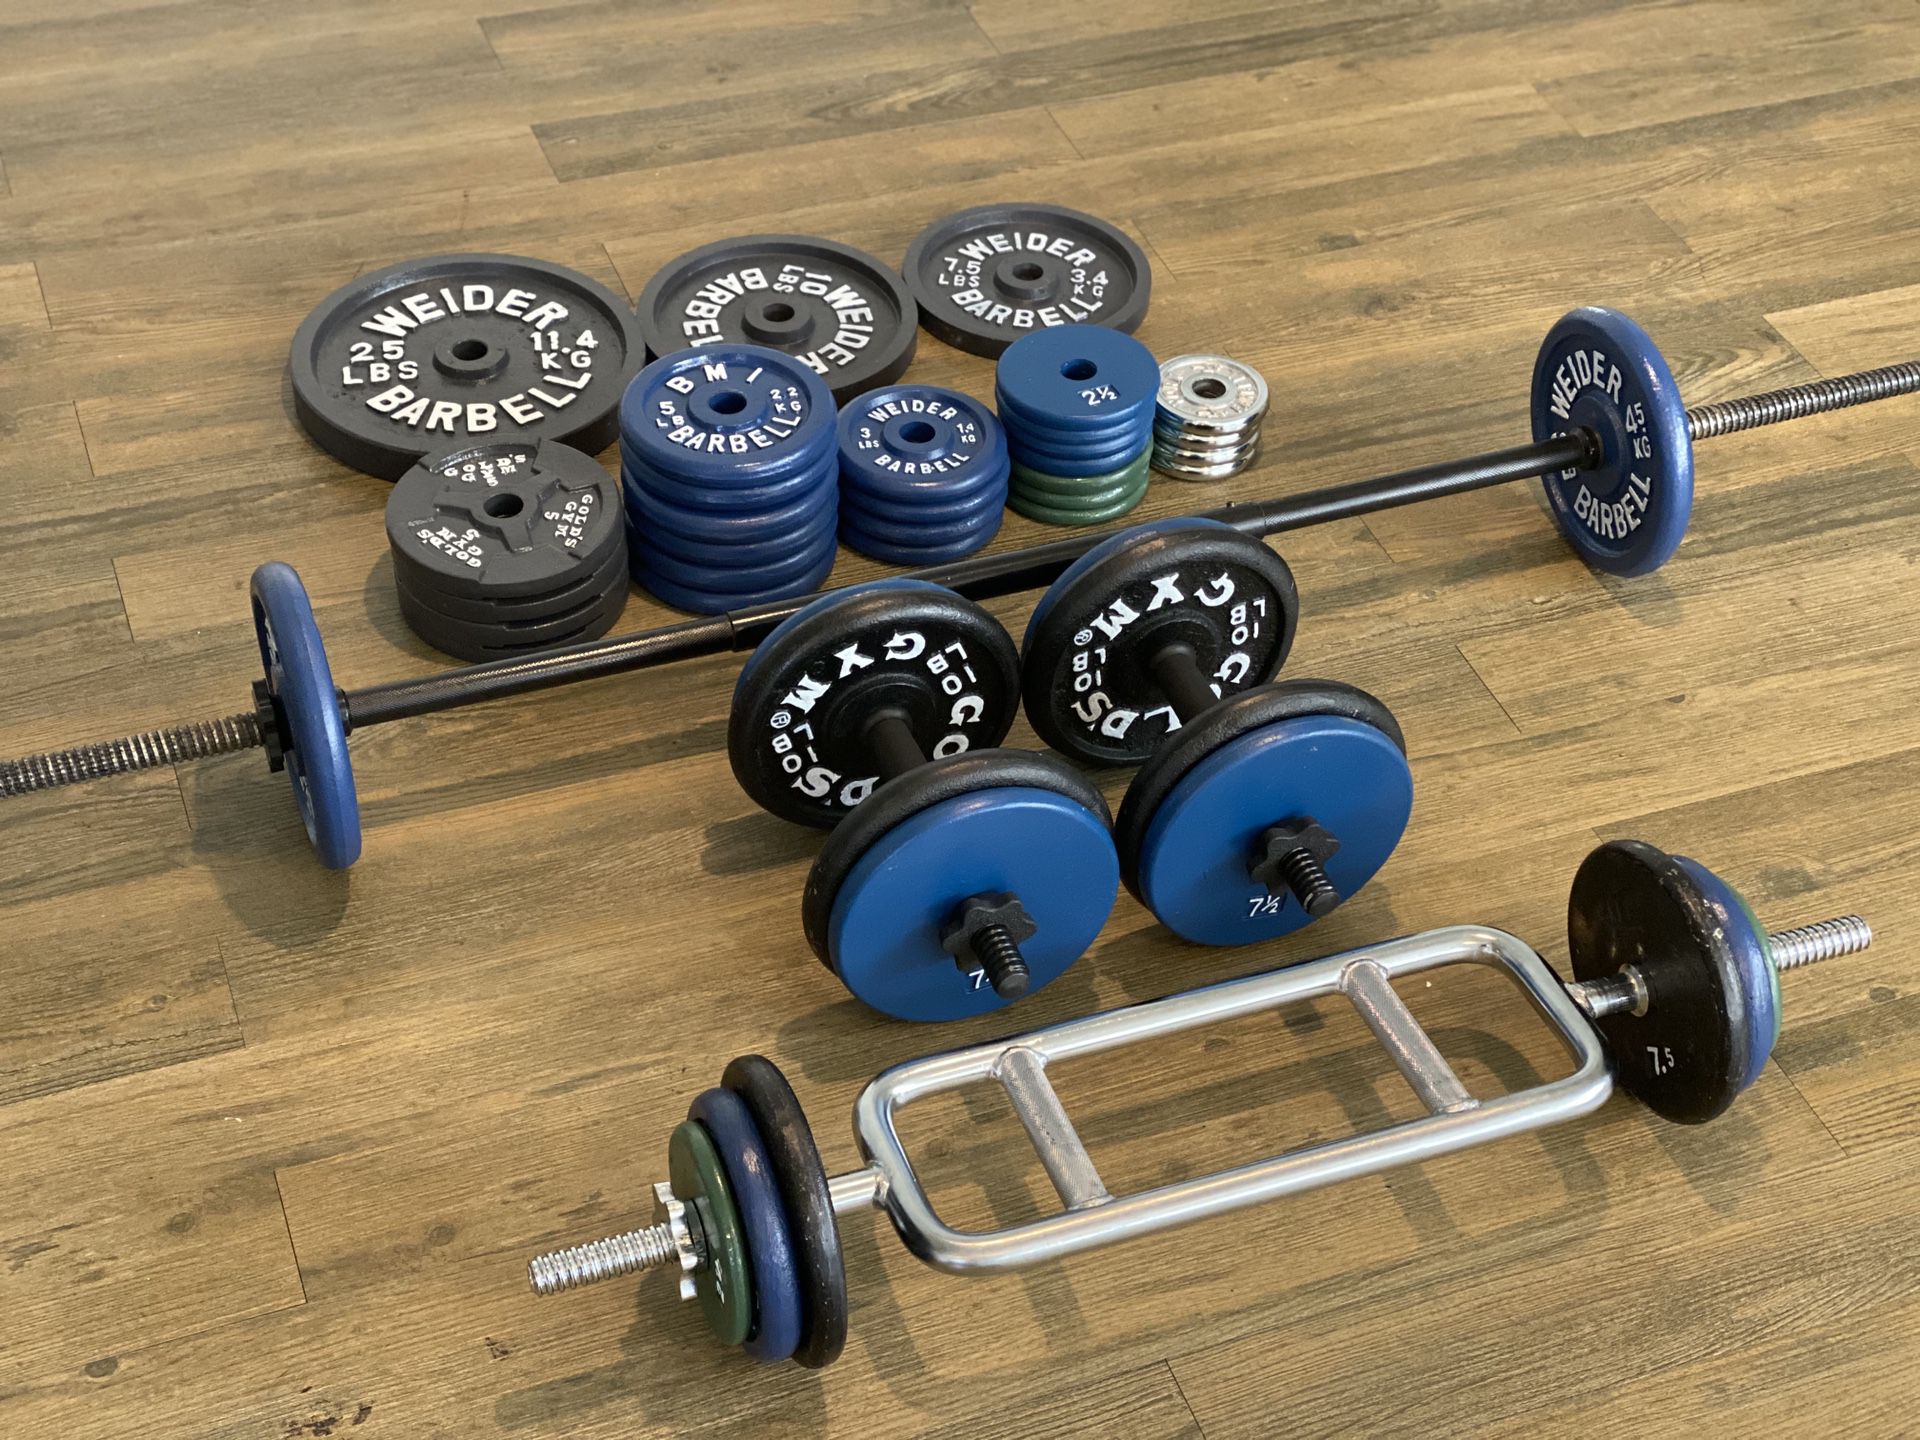 Gym weight Equipment (Weight Plates, Barbell, Dumbbell Handle Bars, Tricep Bar) TOTAL 250+LBS